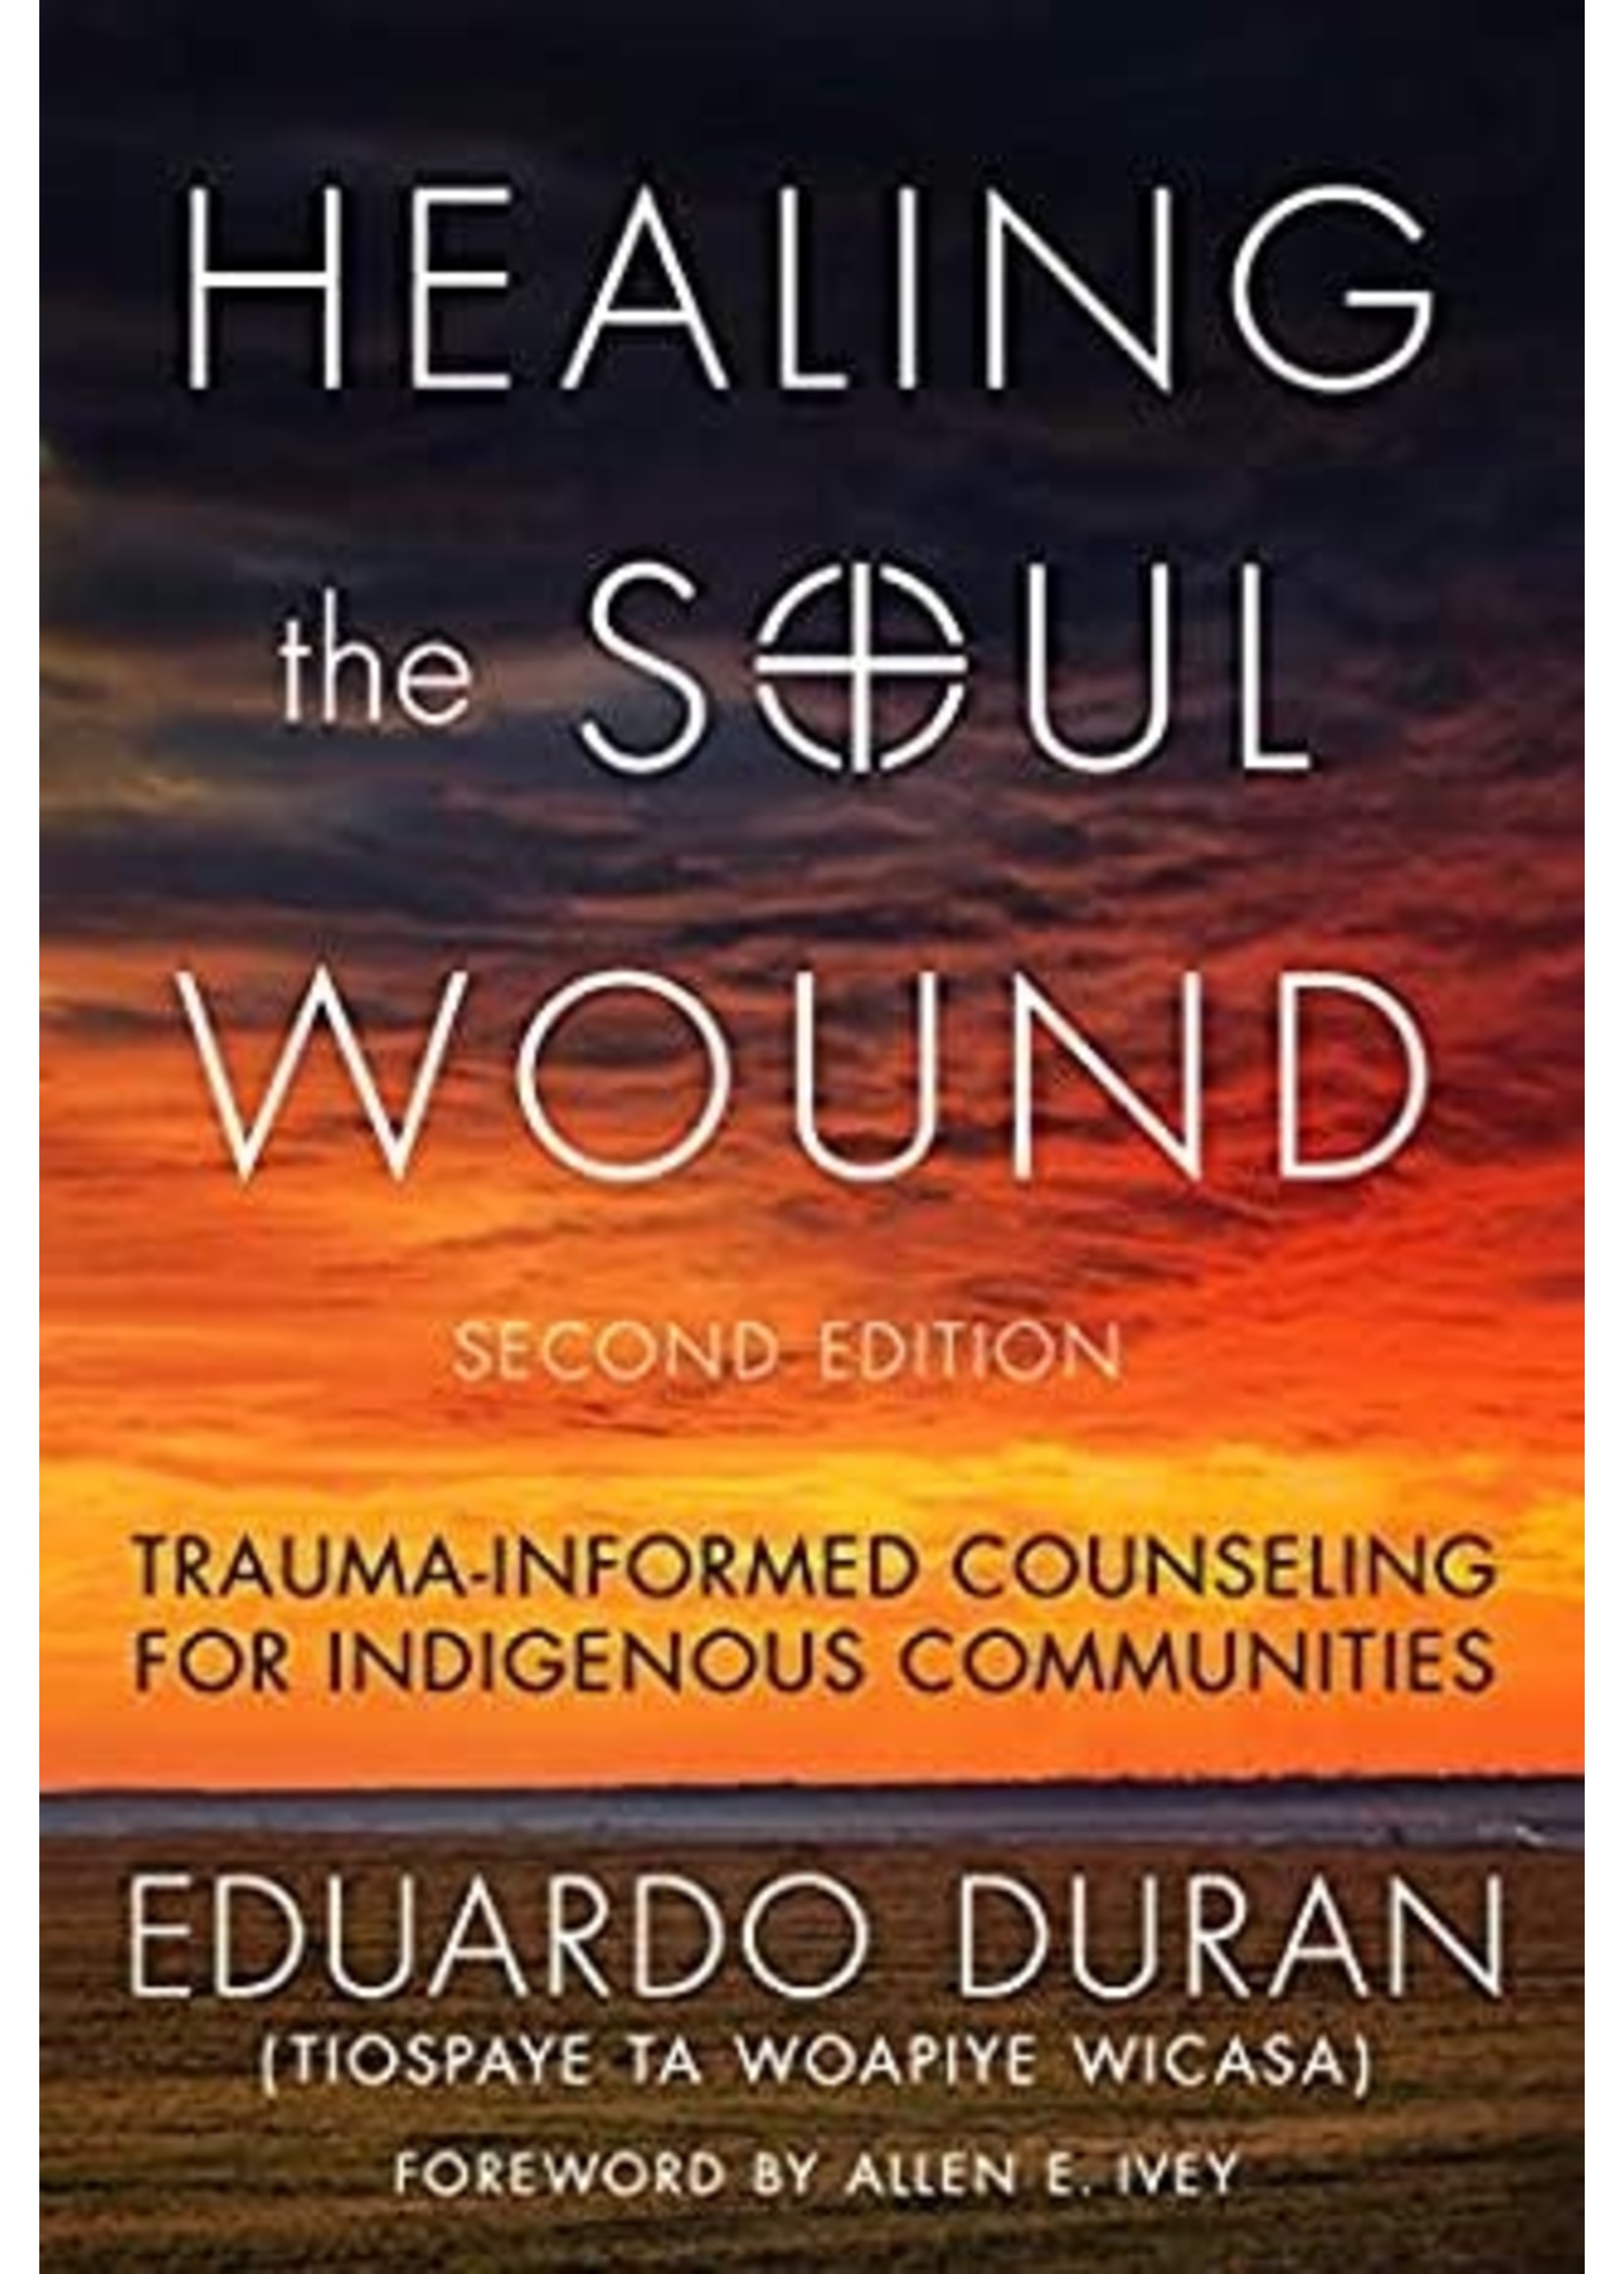 Healing the Soul Wound: Trauma-Informed Counseling for Indigenous Communities by Eduardo Duran